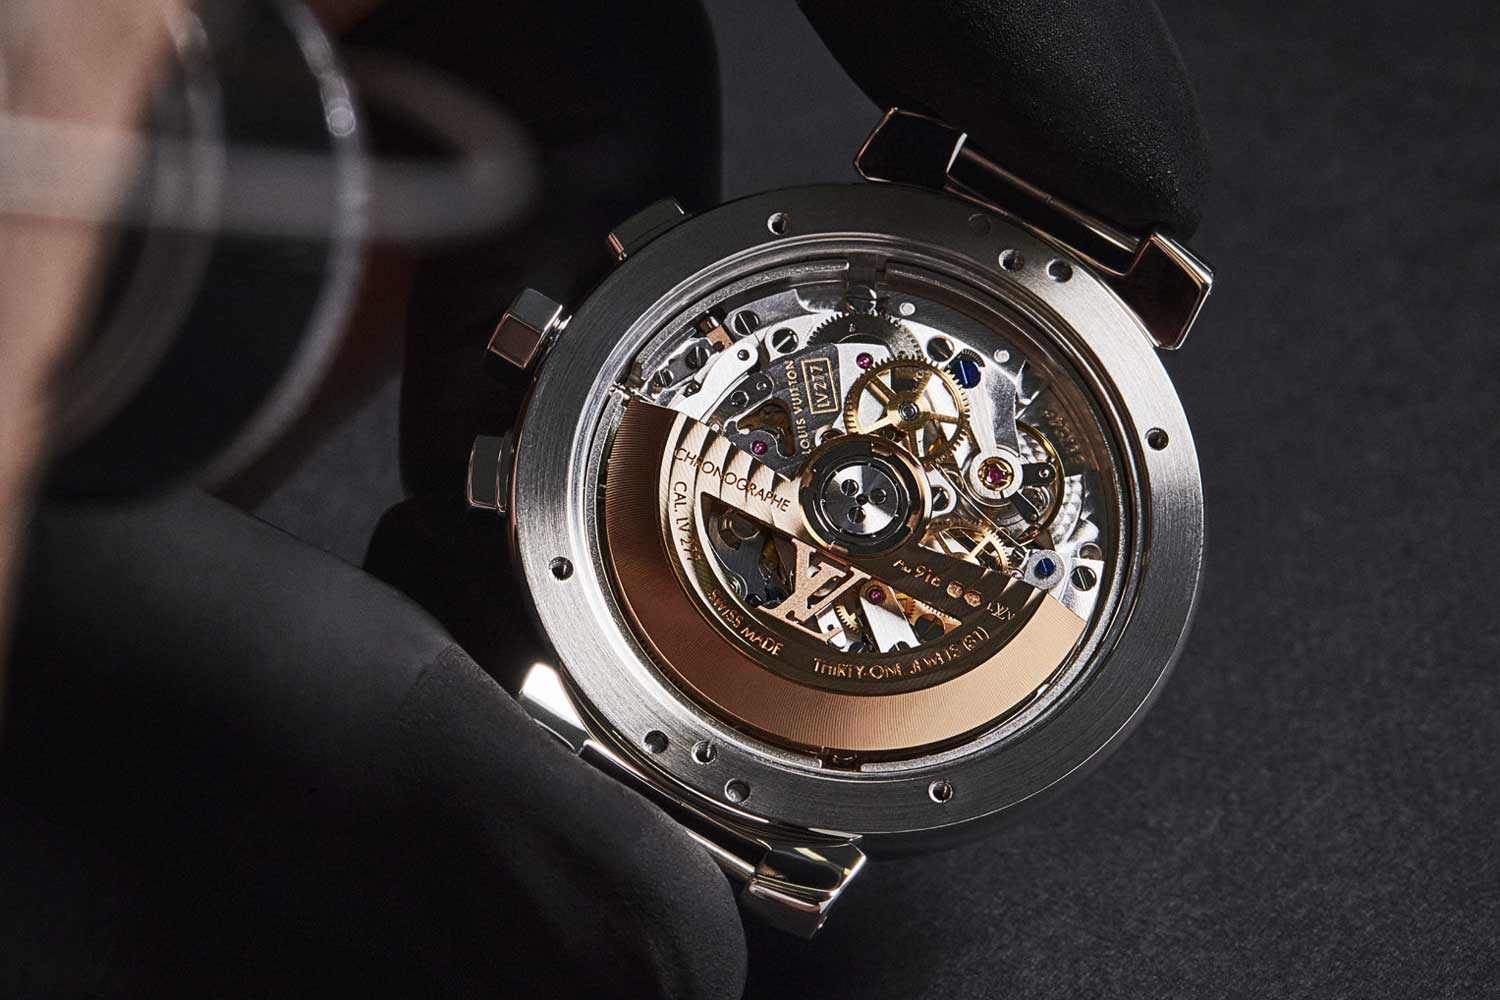 As a tribute to the first Tambour Chronograph in 2002, that was equipped with a COSC-certified automatic Zenith El Primero movement, inside the polished case is the La Fabrique du Temps’ LV277 high-frequency movement, developed from the famous Zenith El Primero automatic chronograph The caliber LV277 features a 22K pink gold oscillating weight